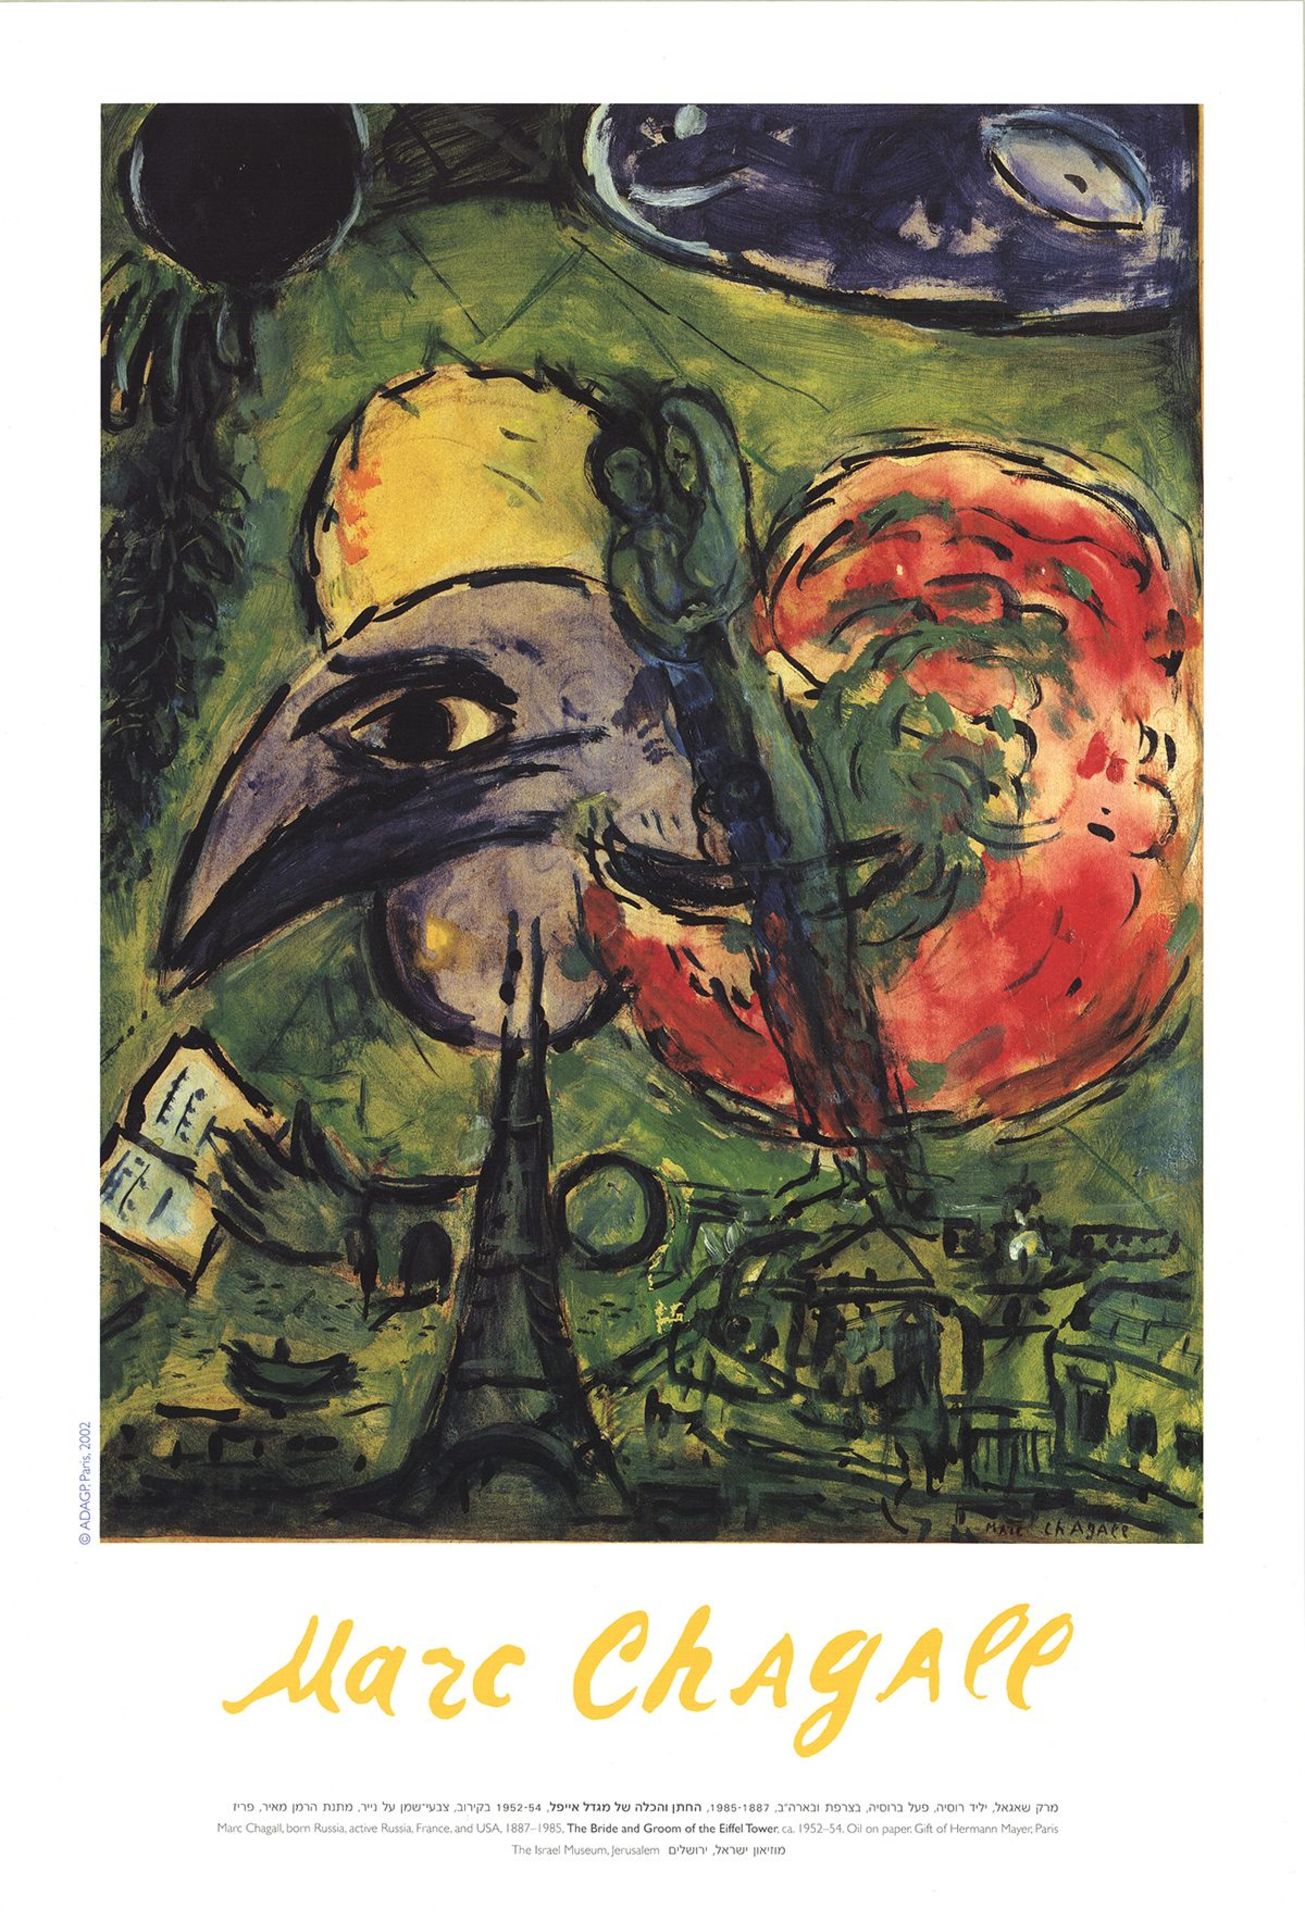 Marc Chagall - The Bride And Groom Of The Eiffel Tower